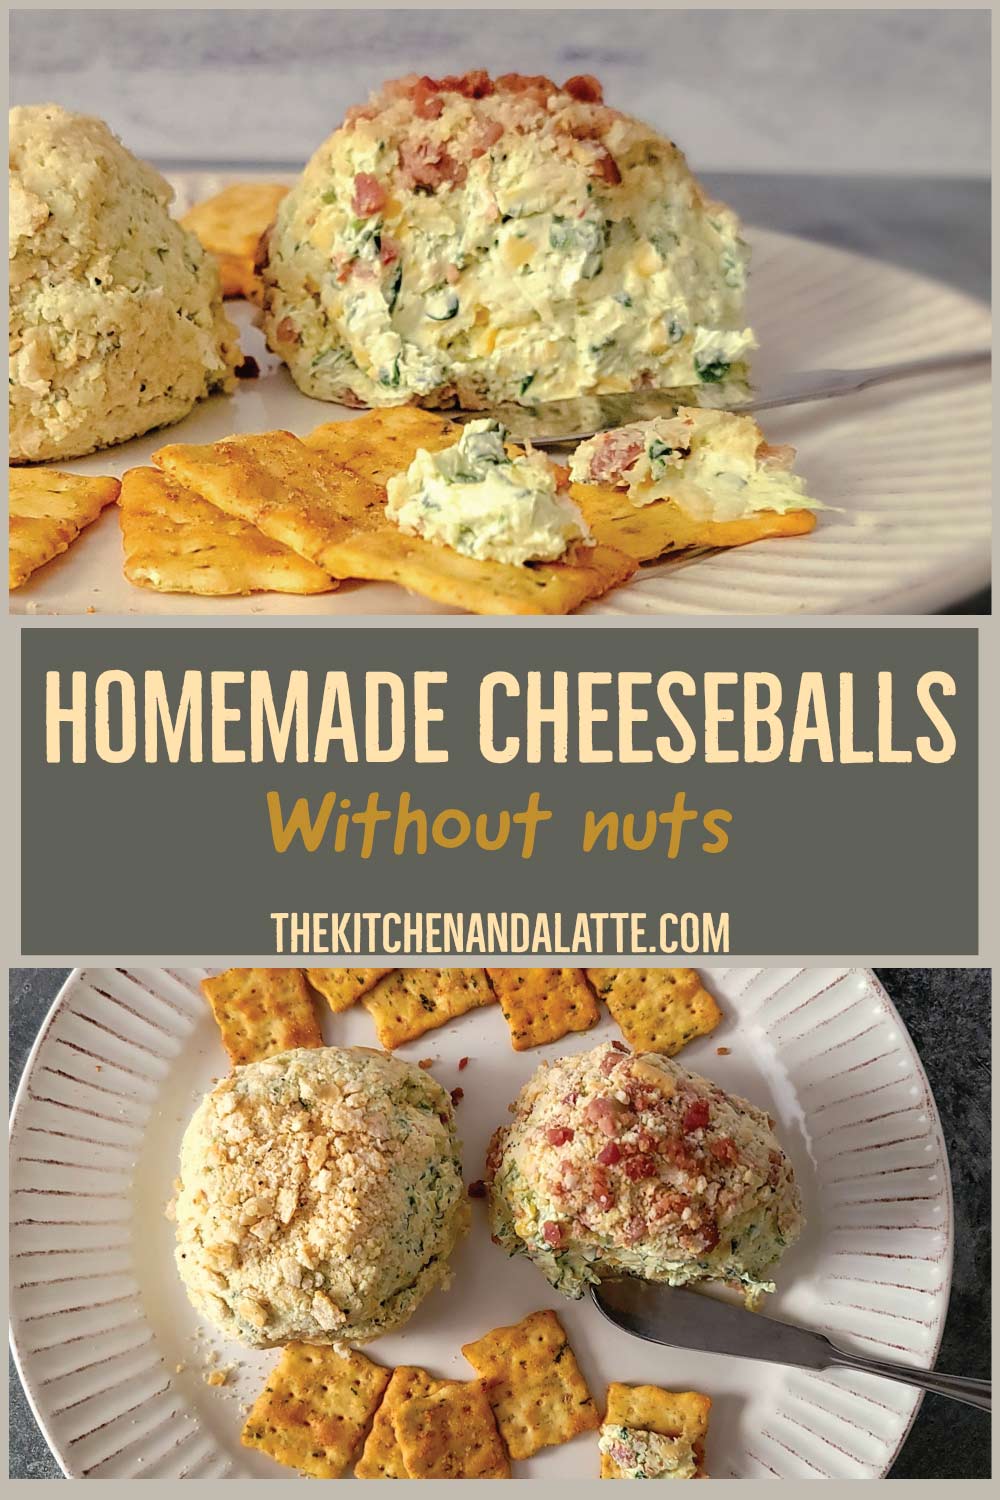 Homemade cheeseballs without nuts Pinterest graphic. 2 cheeseballs on a plate with crackers spread around them. 2 of the crackers have cheese spread on them.